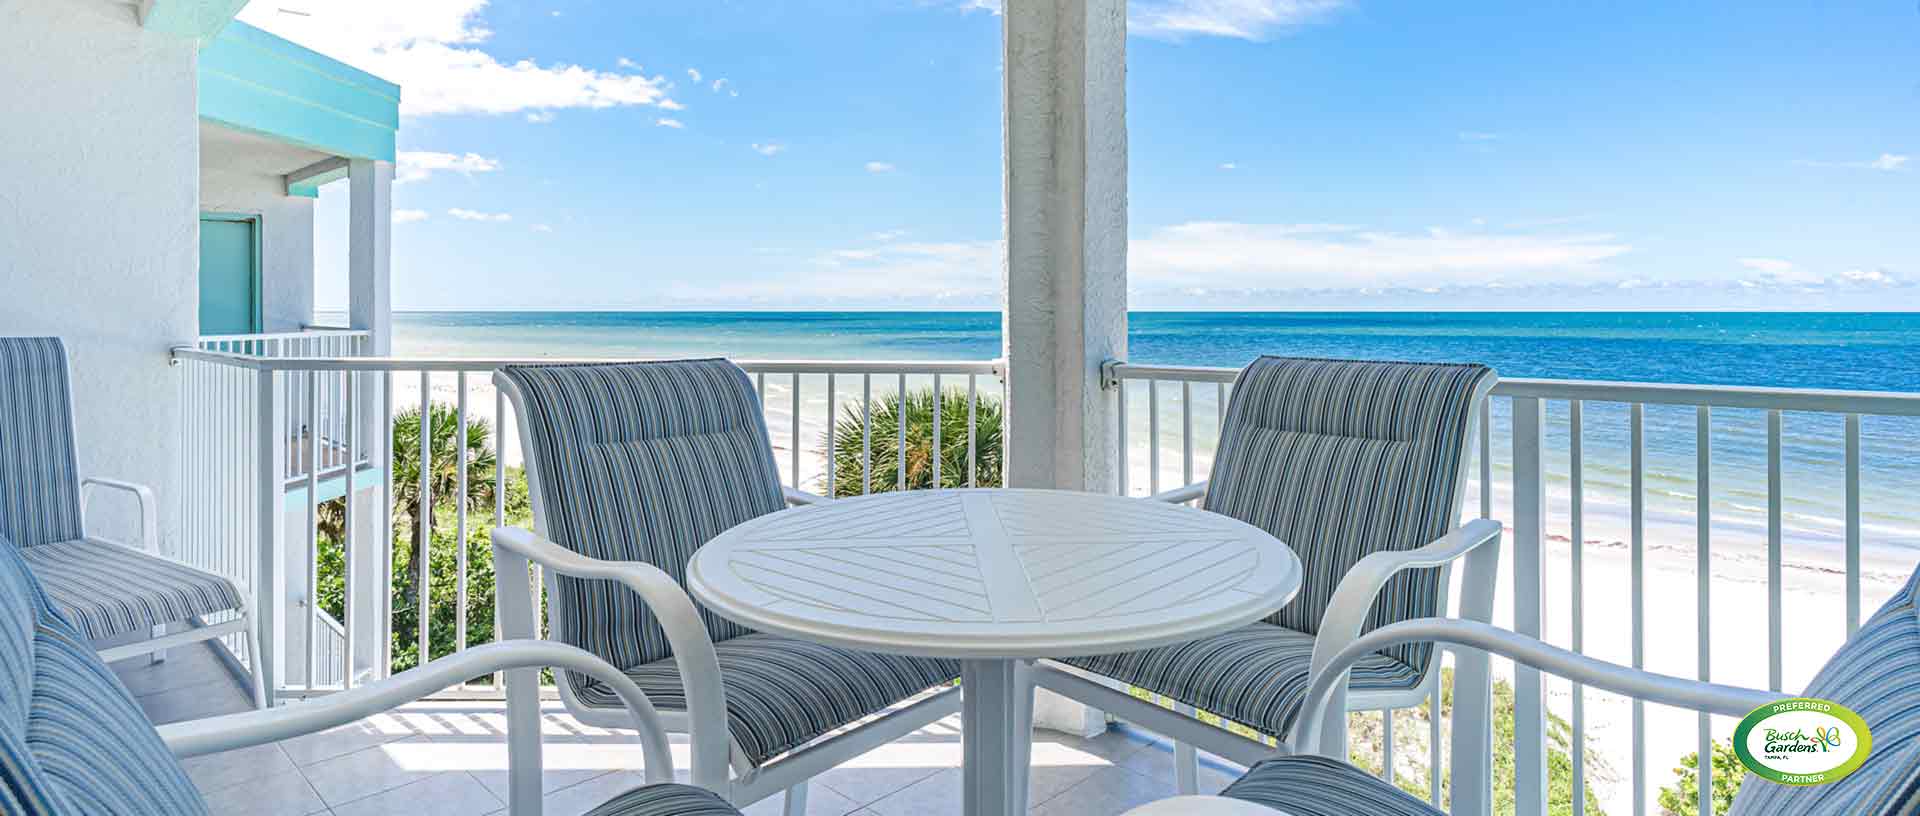 covered balcony table and chairs with beach view